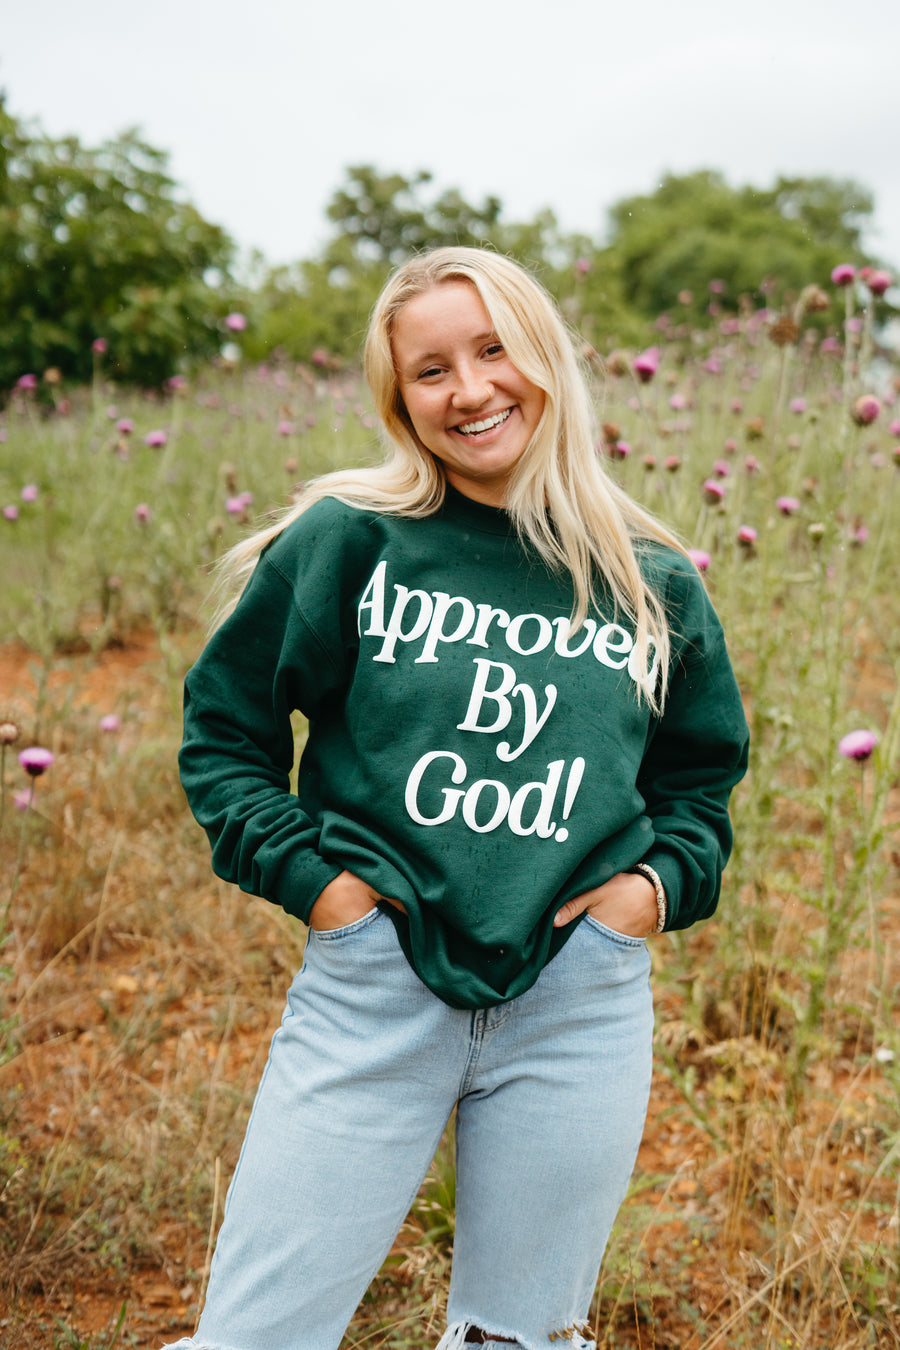 Approved by God - Sweatshirt